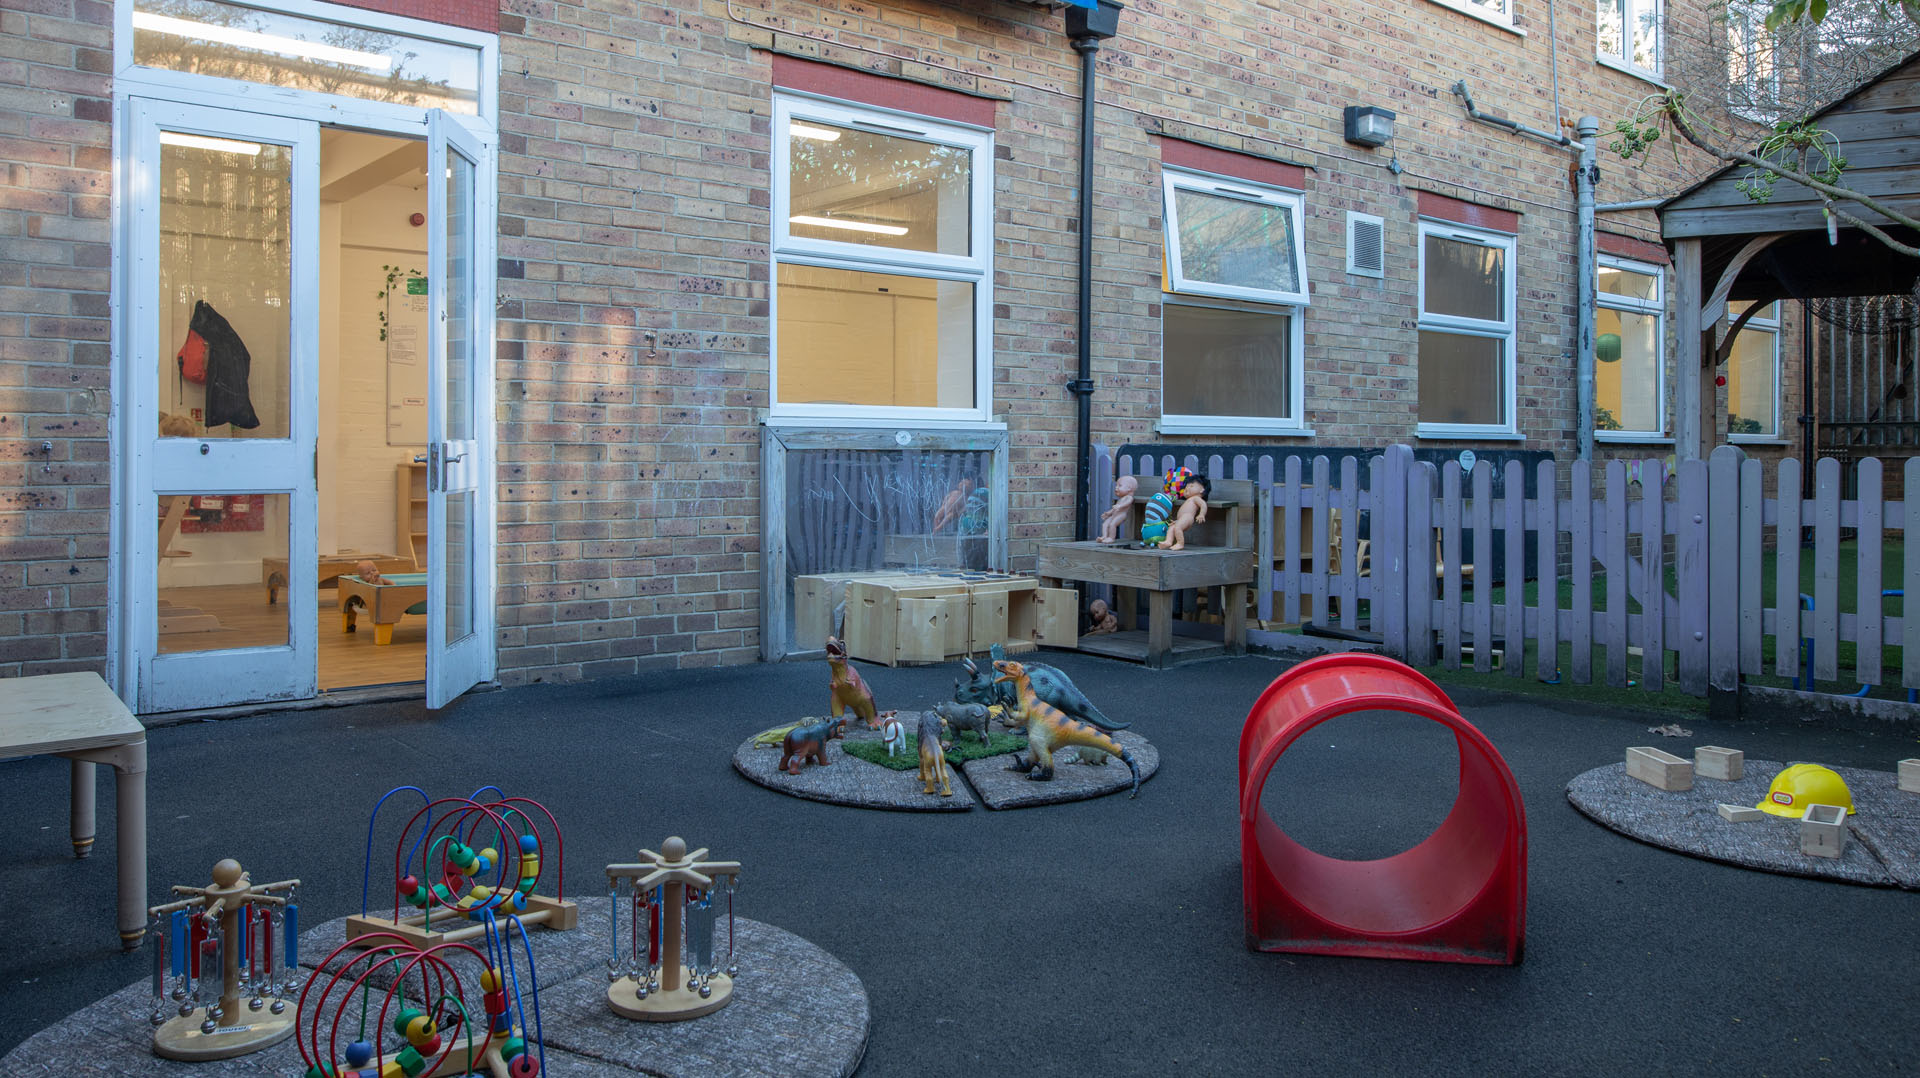 Maythorne Cottages Day Nursery and Preschool room outside